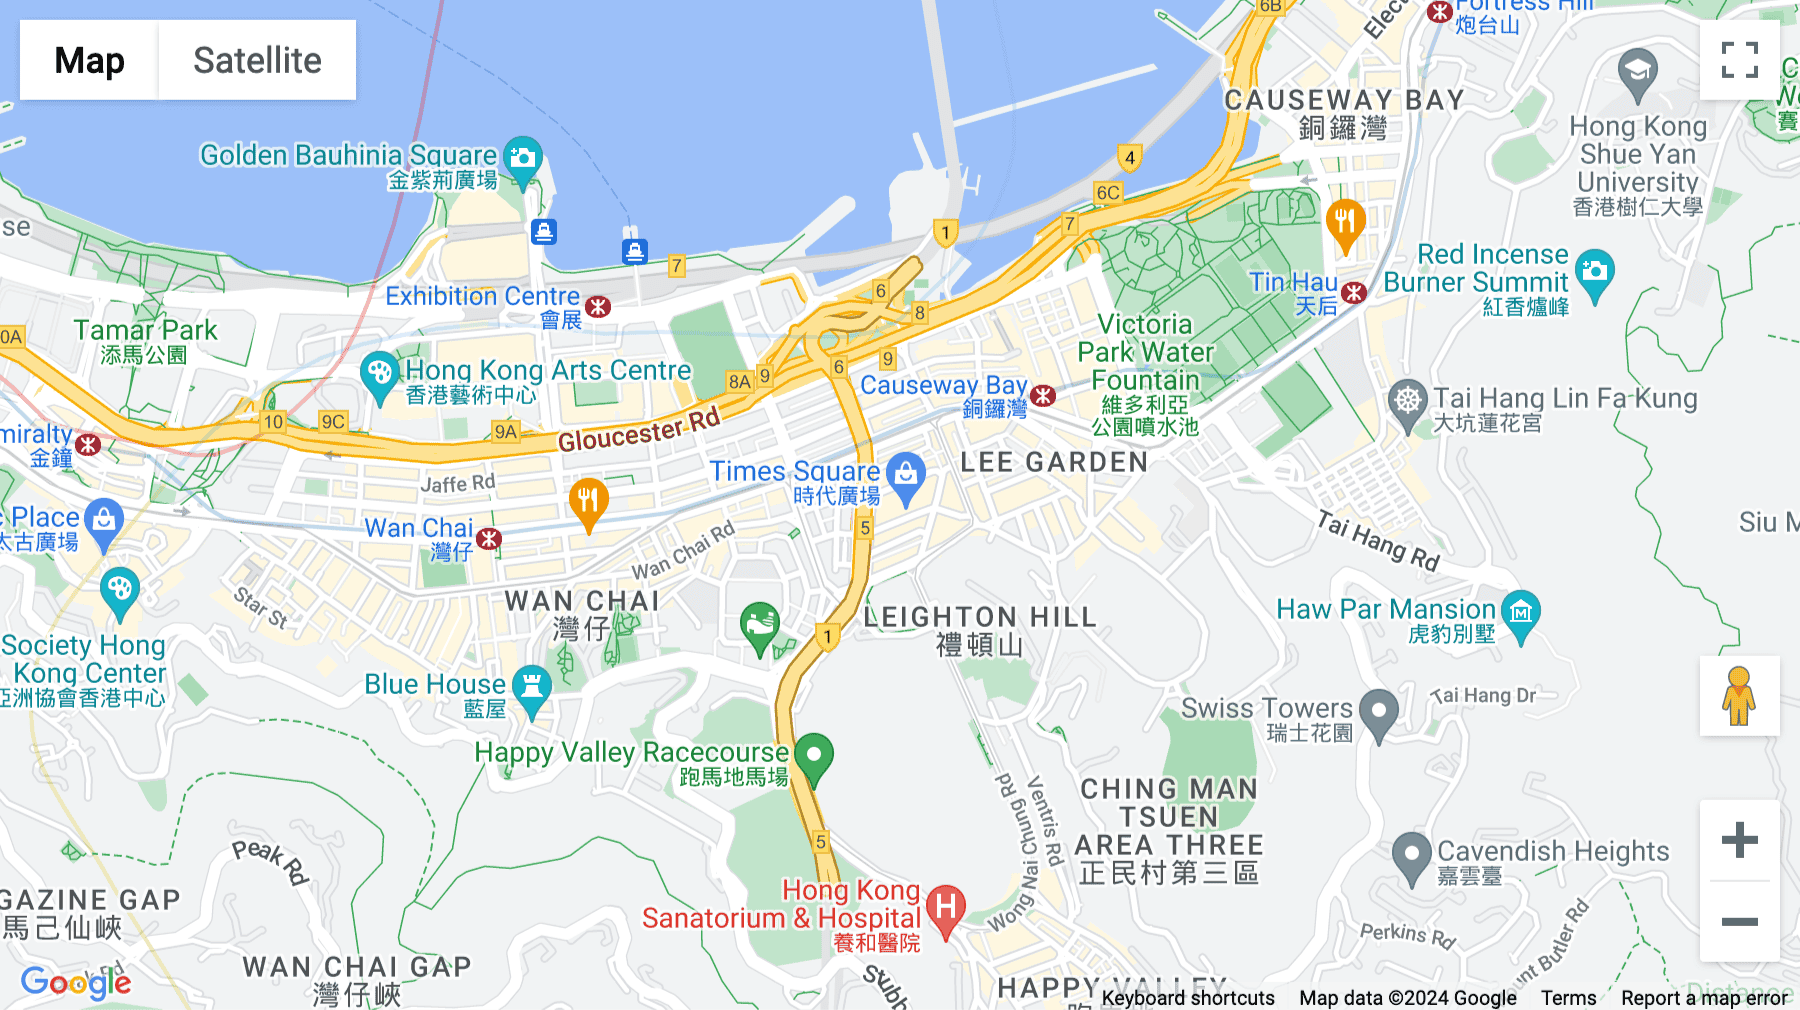 Click for interative map of Level 34, Tower One, Times Square, 1 Matheson St, Causeway Bay, Hong Kong